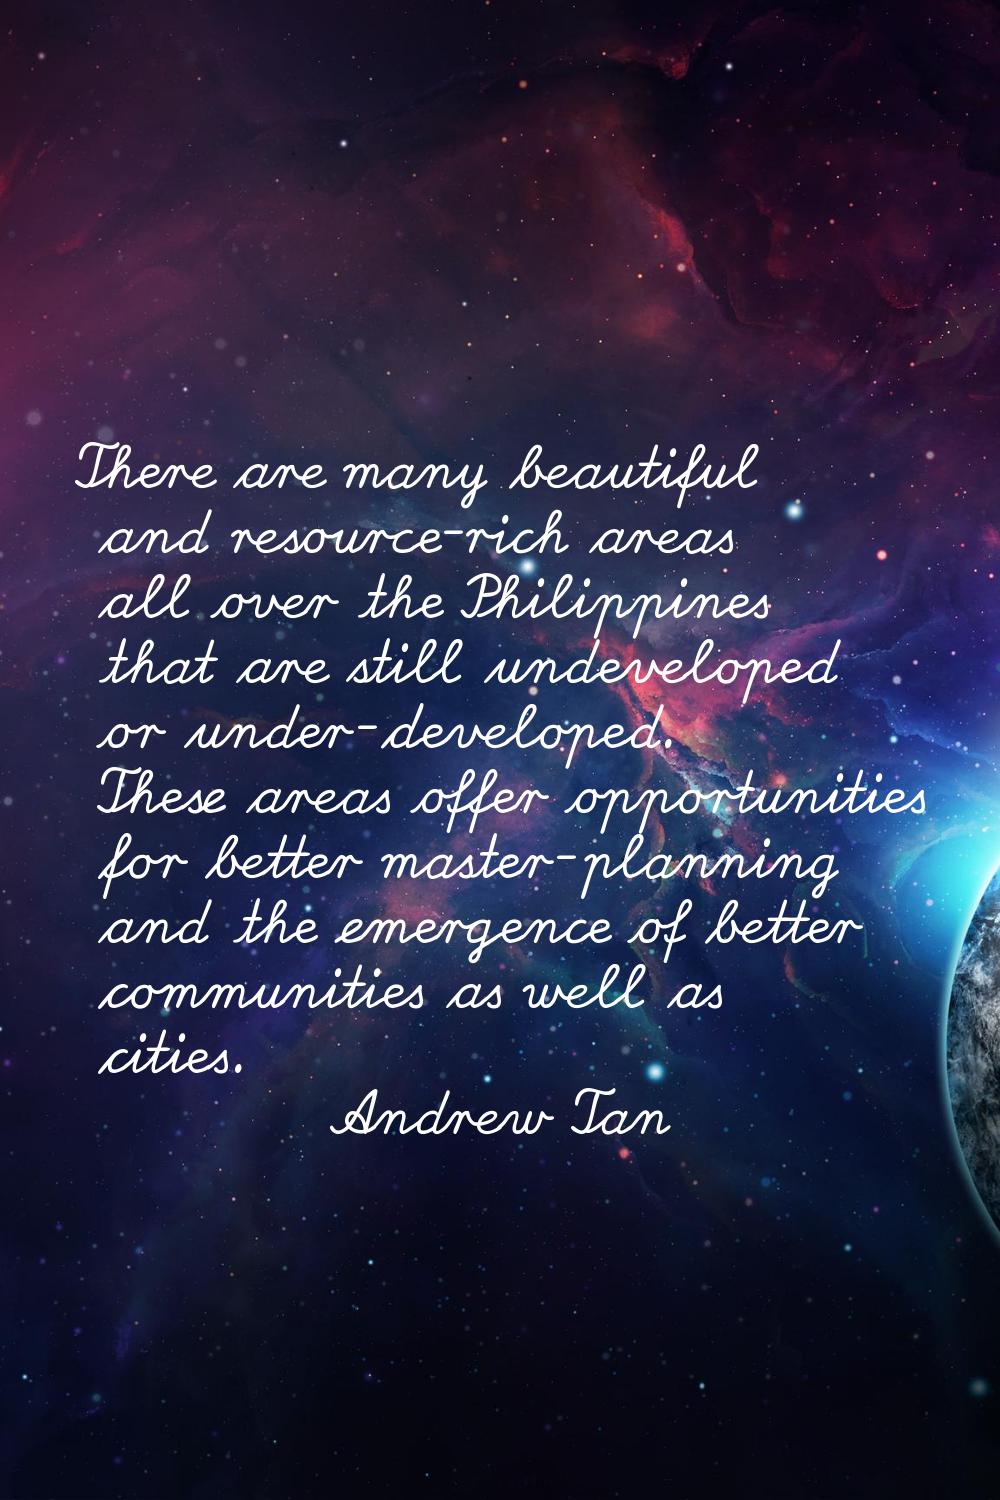 There are many beautiful and resource-rich areas all over the Philippines that are still undevelope